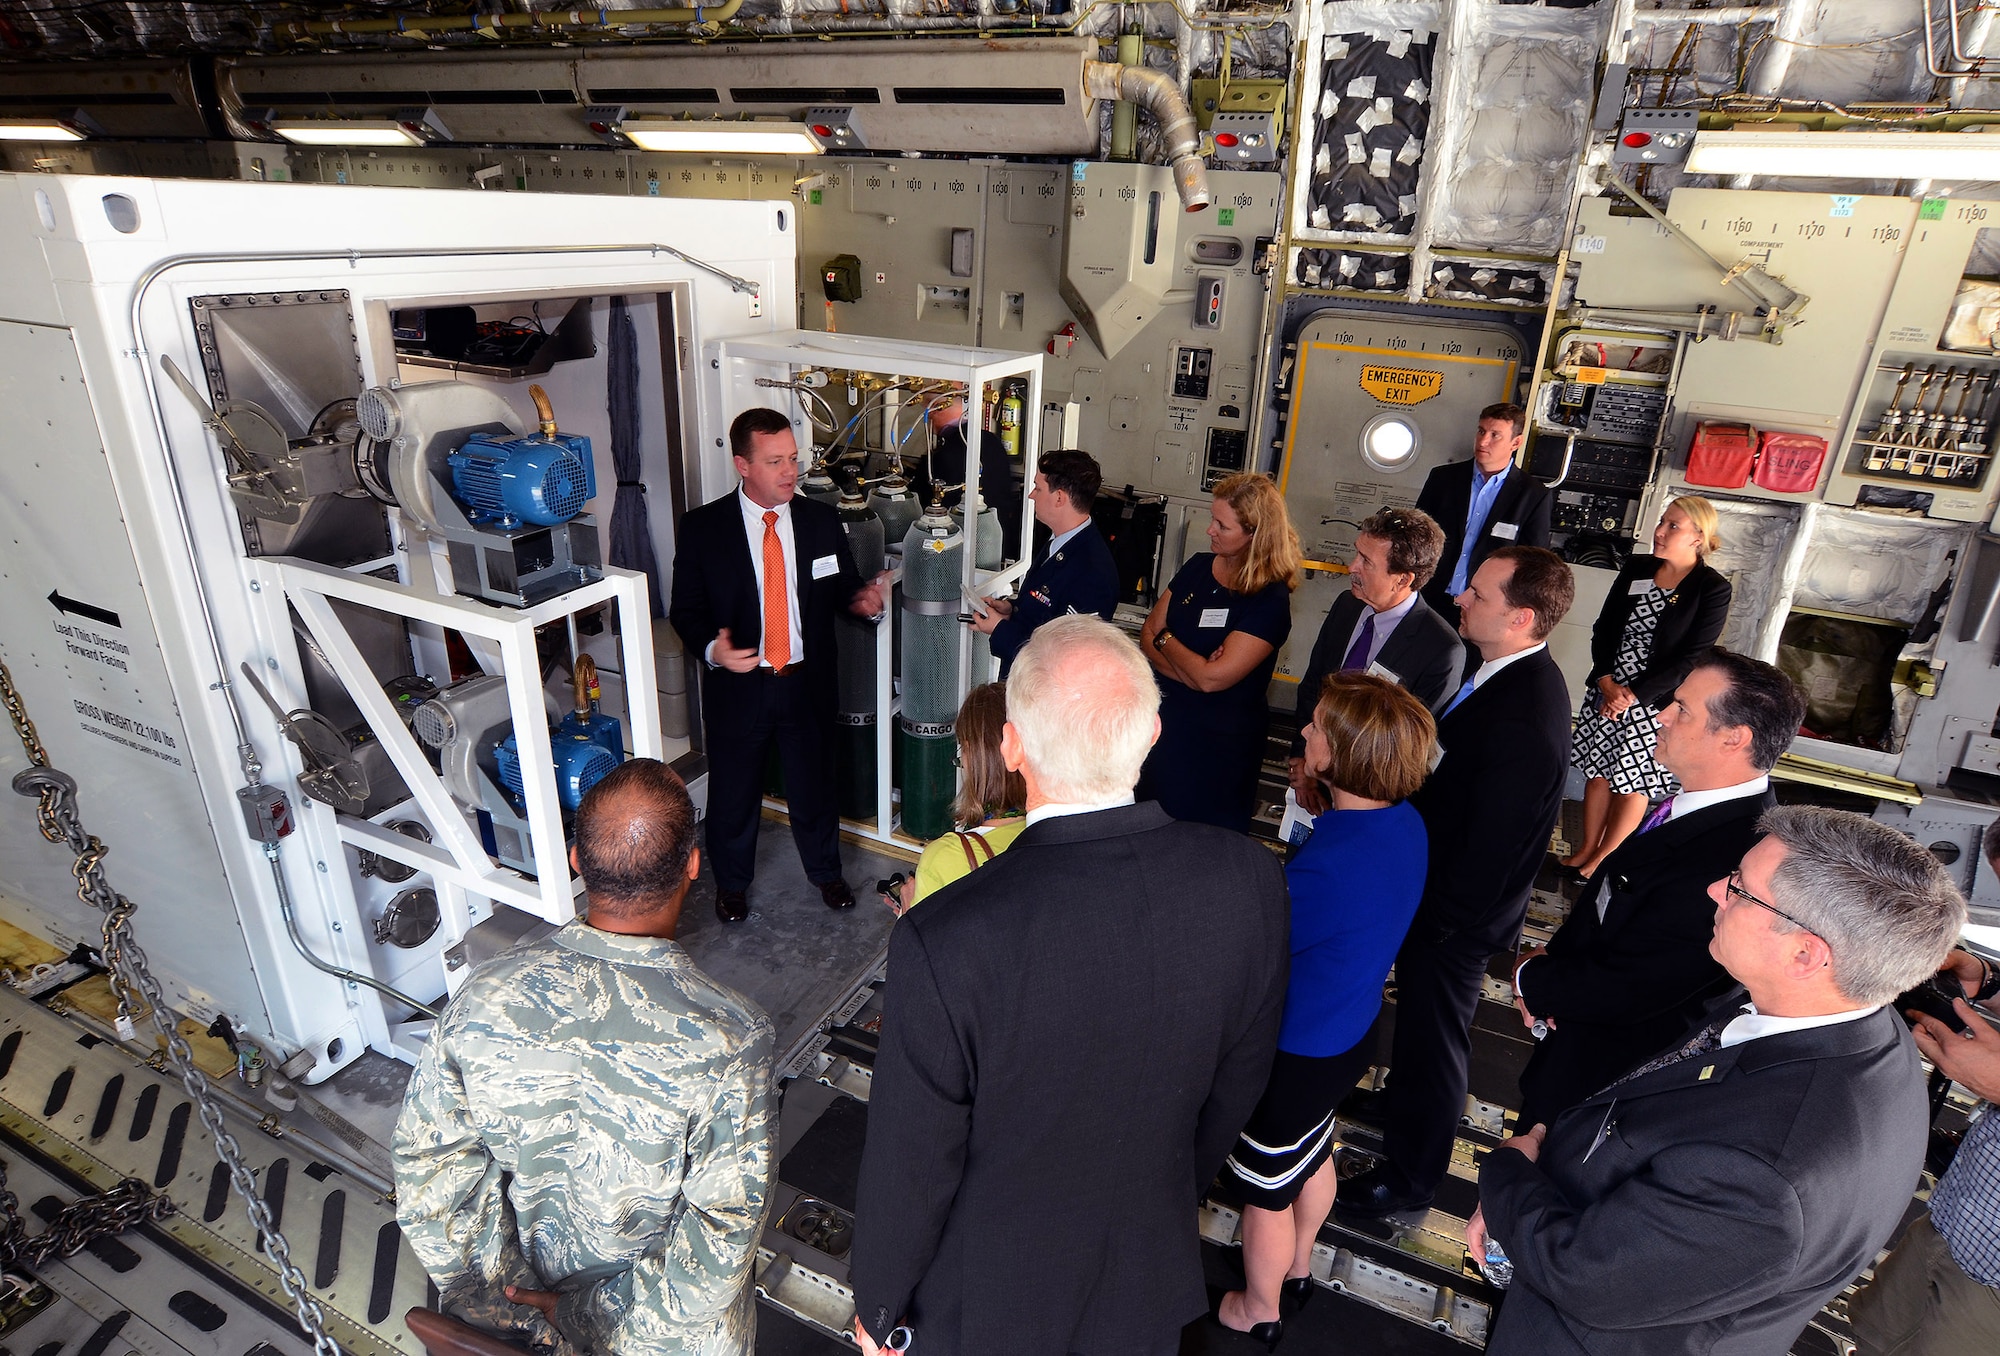 Invited guest and members of the press receive a briefing from U.S. State Department Director of Operational Medicine Dr. Will Walters about the Containerized Biocontainment Systems unit positioned on a U.S. Air Force C-17 to see how the unit could be airlifted to anywhere in the world if needed; Dobbins Air Reserve Base, Ga., Aug. 11, 2015. The two Containerized Biocontainment units were built by MRIGlobal through a partnership with the U.S. State Dept. and the Paul G. Allen Ebola Program, will be positioned at Dobbins ARB, ready for future. (U.S. Air Force photo/ Brad Fallin)